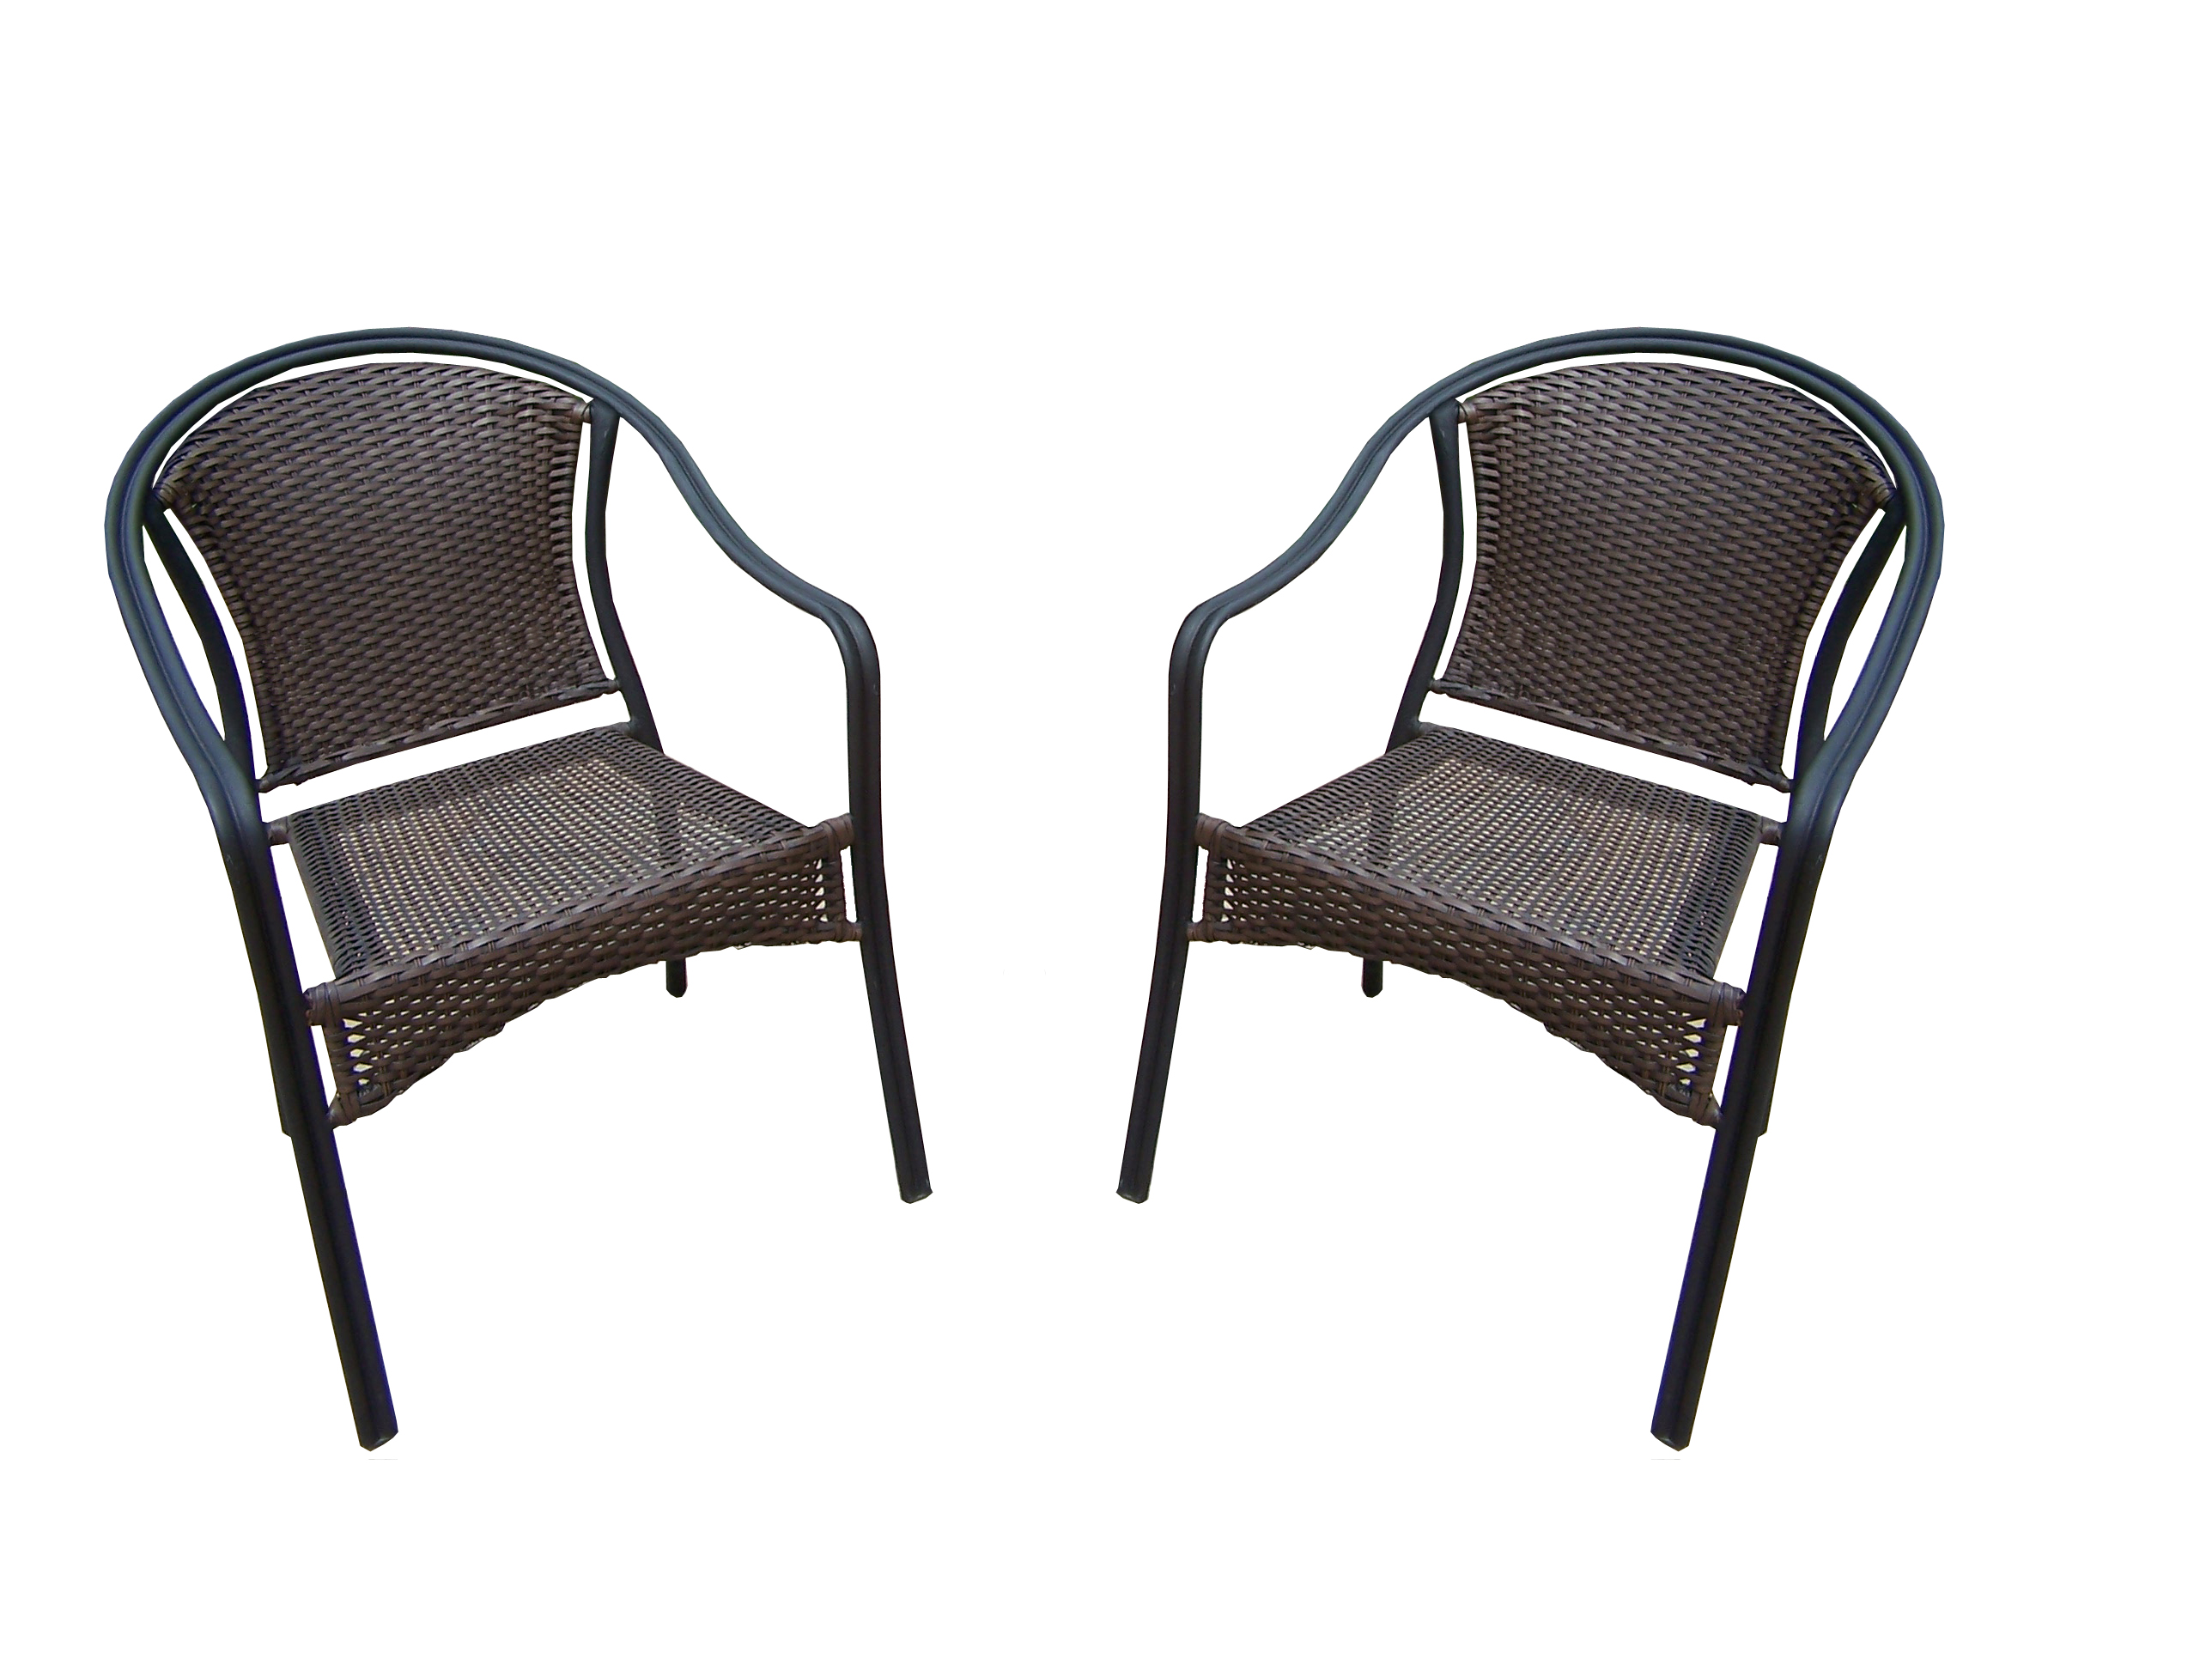 Oakland Living Pair of Stackable Wicker Chairs with Round backs (Pack of 2)